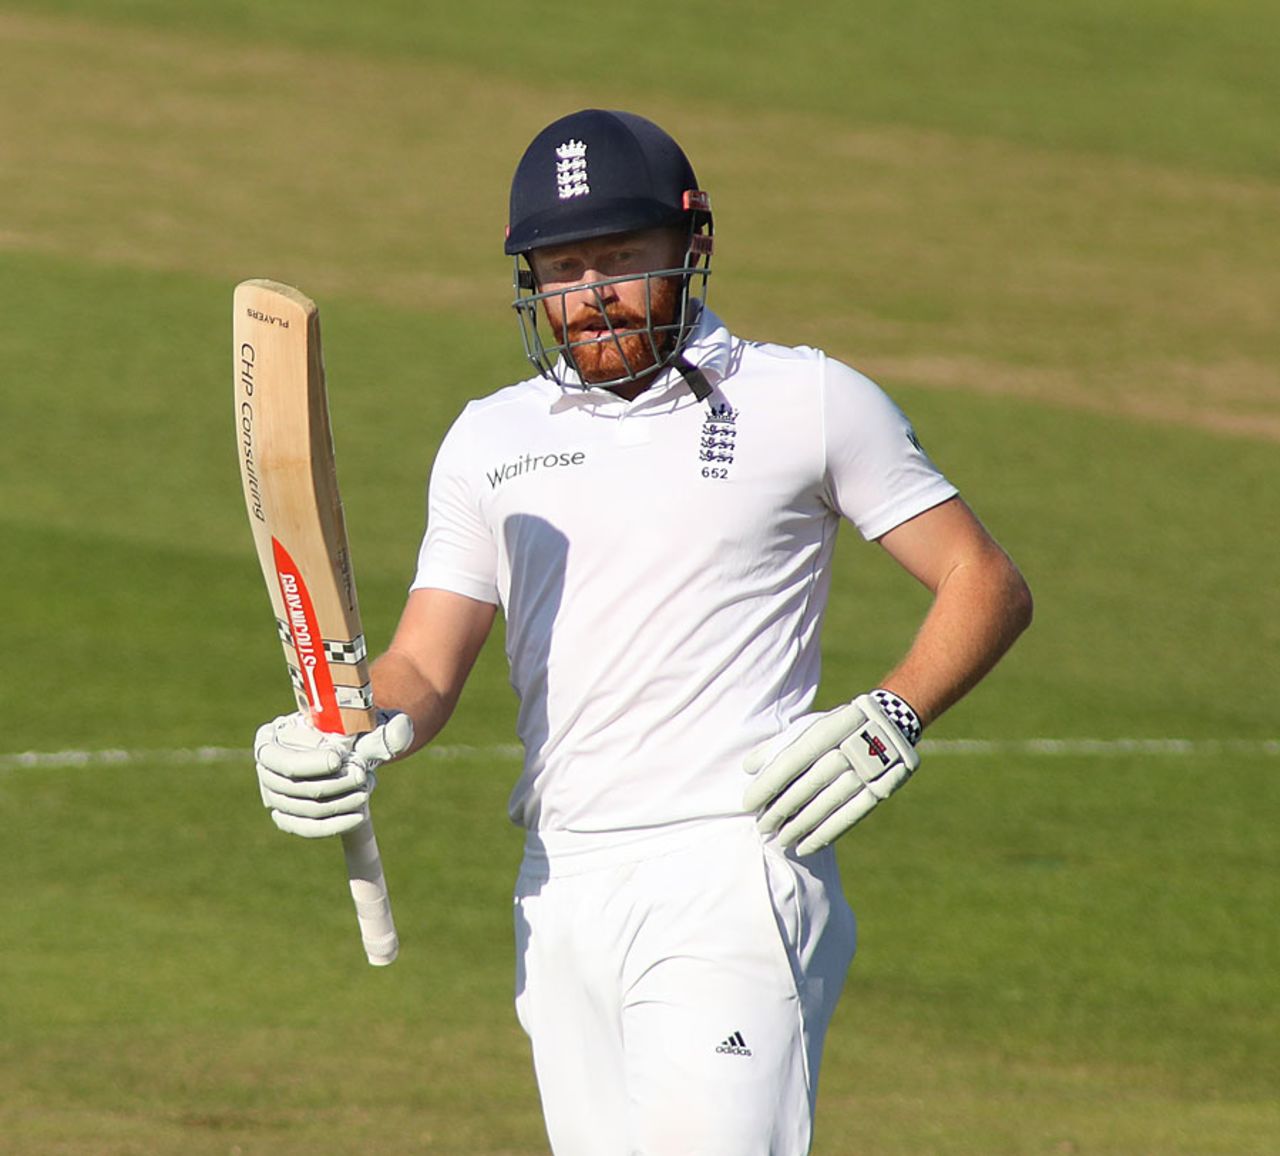 Jonny Bairstow put England in charge, England v Pakistan, 3rd Investec Test, Edgbaston, 4th day, August 6, 2016